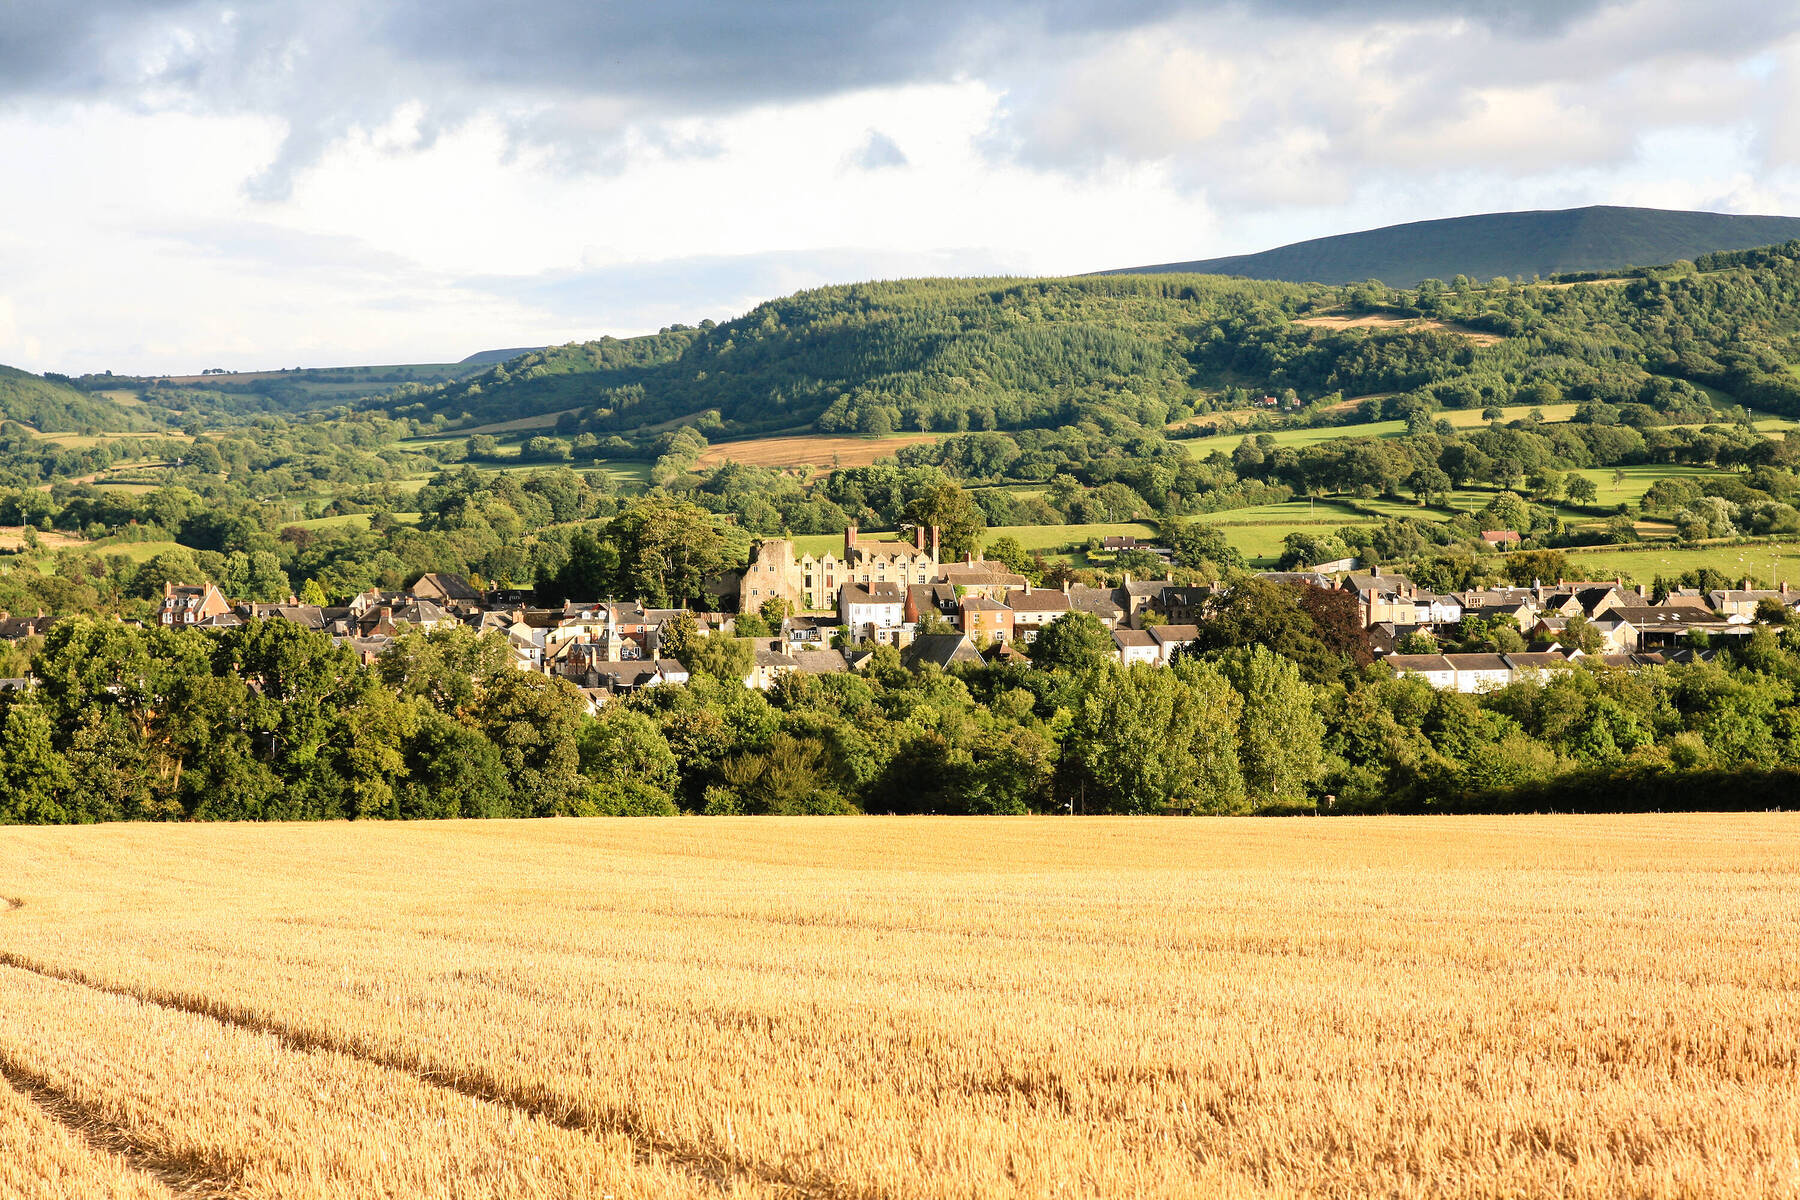 A bibliophile's guide to Hay-on-Wye in Wales